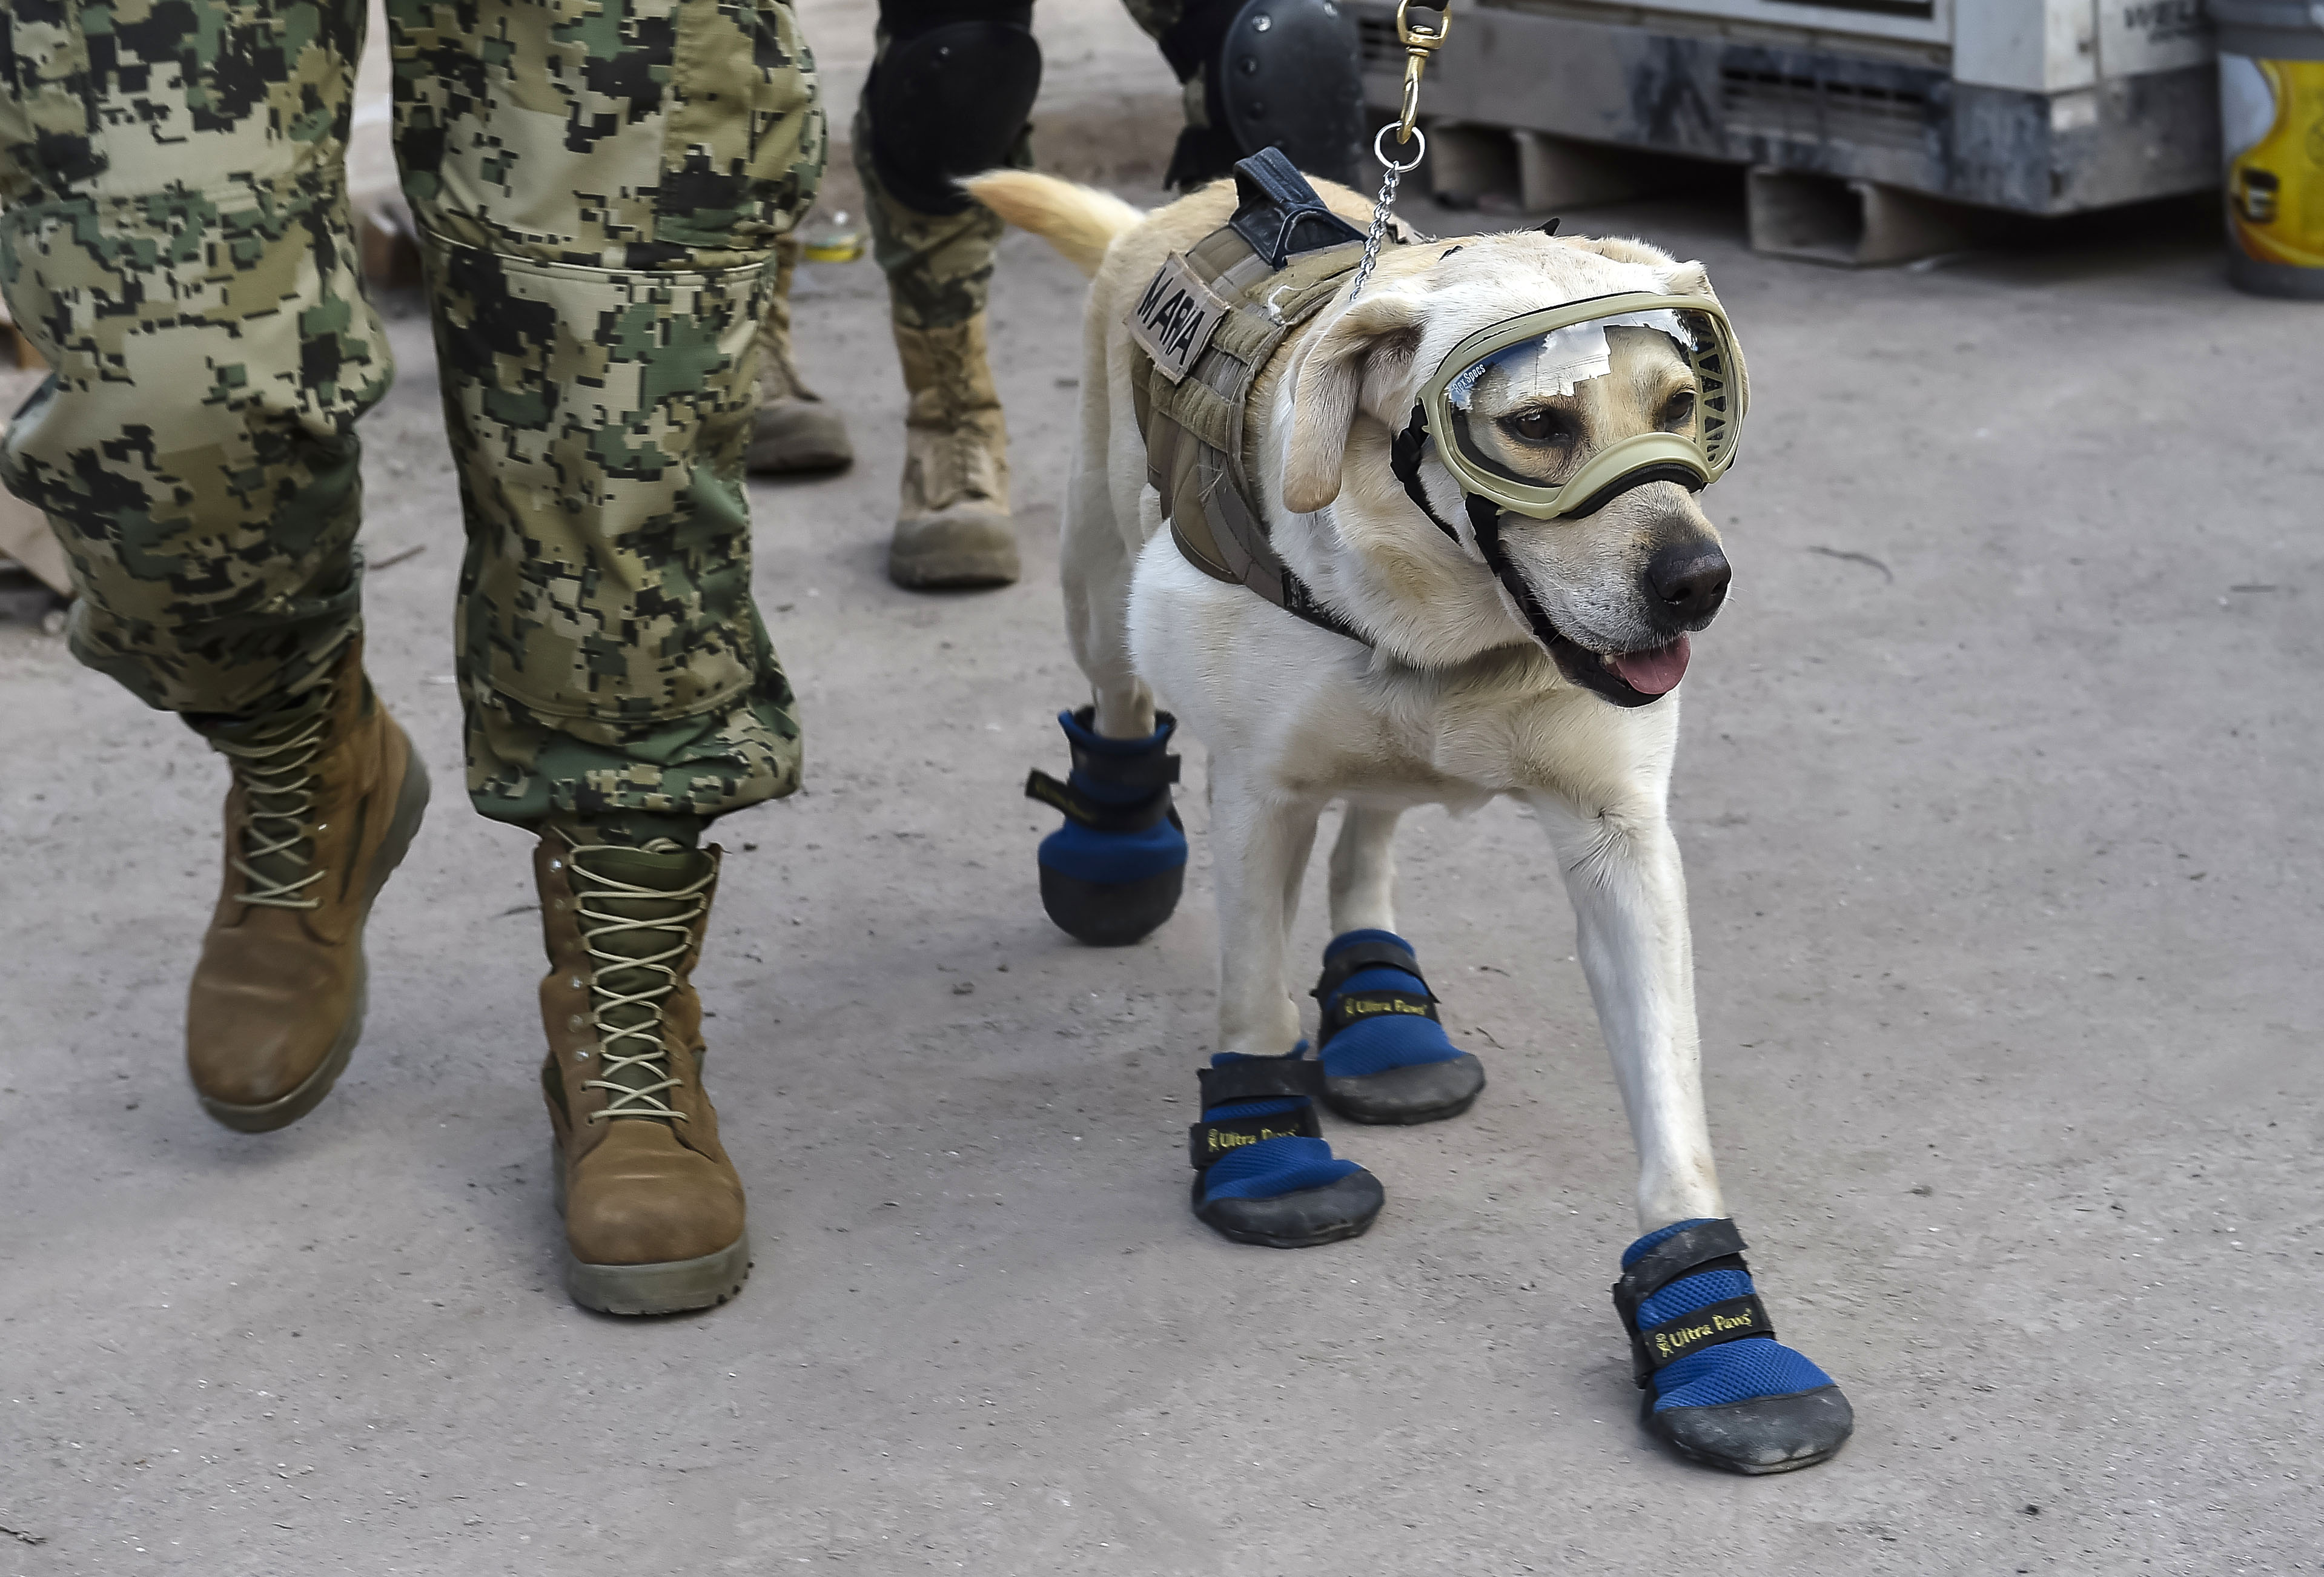 Frida, a rescue dog belonging to the Mexican Navy, with her handler Israel Arauz Salinas, takes part in the effort to look for people trapped at the Rebsamen school in Mexico City, on September 22, 2017, three days after the devastating earthquake that hit central Mexico. (OMAR TORRES&mdash;AFP/Getty Images)